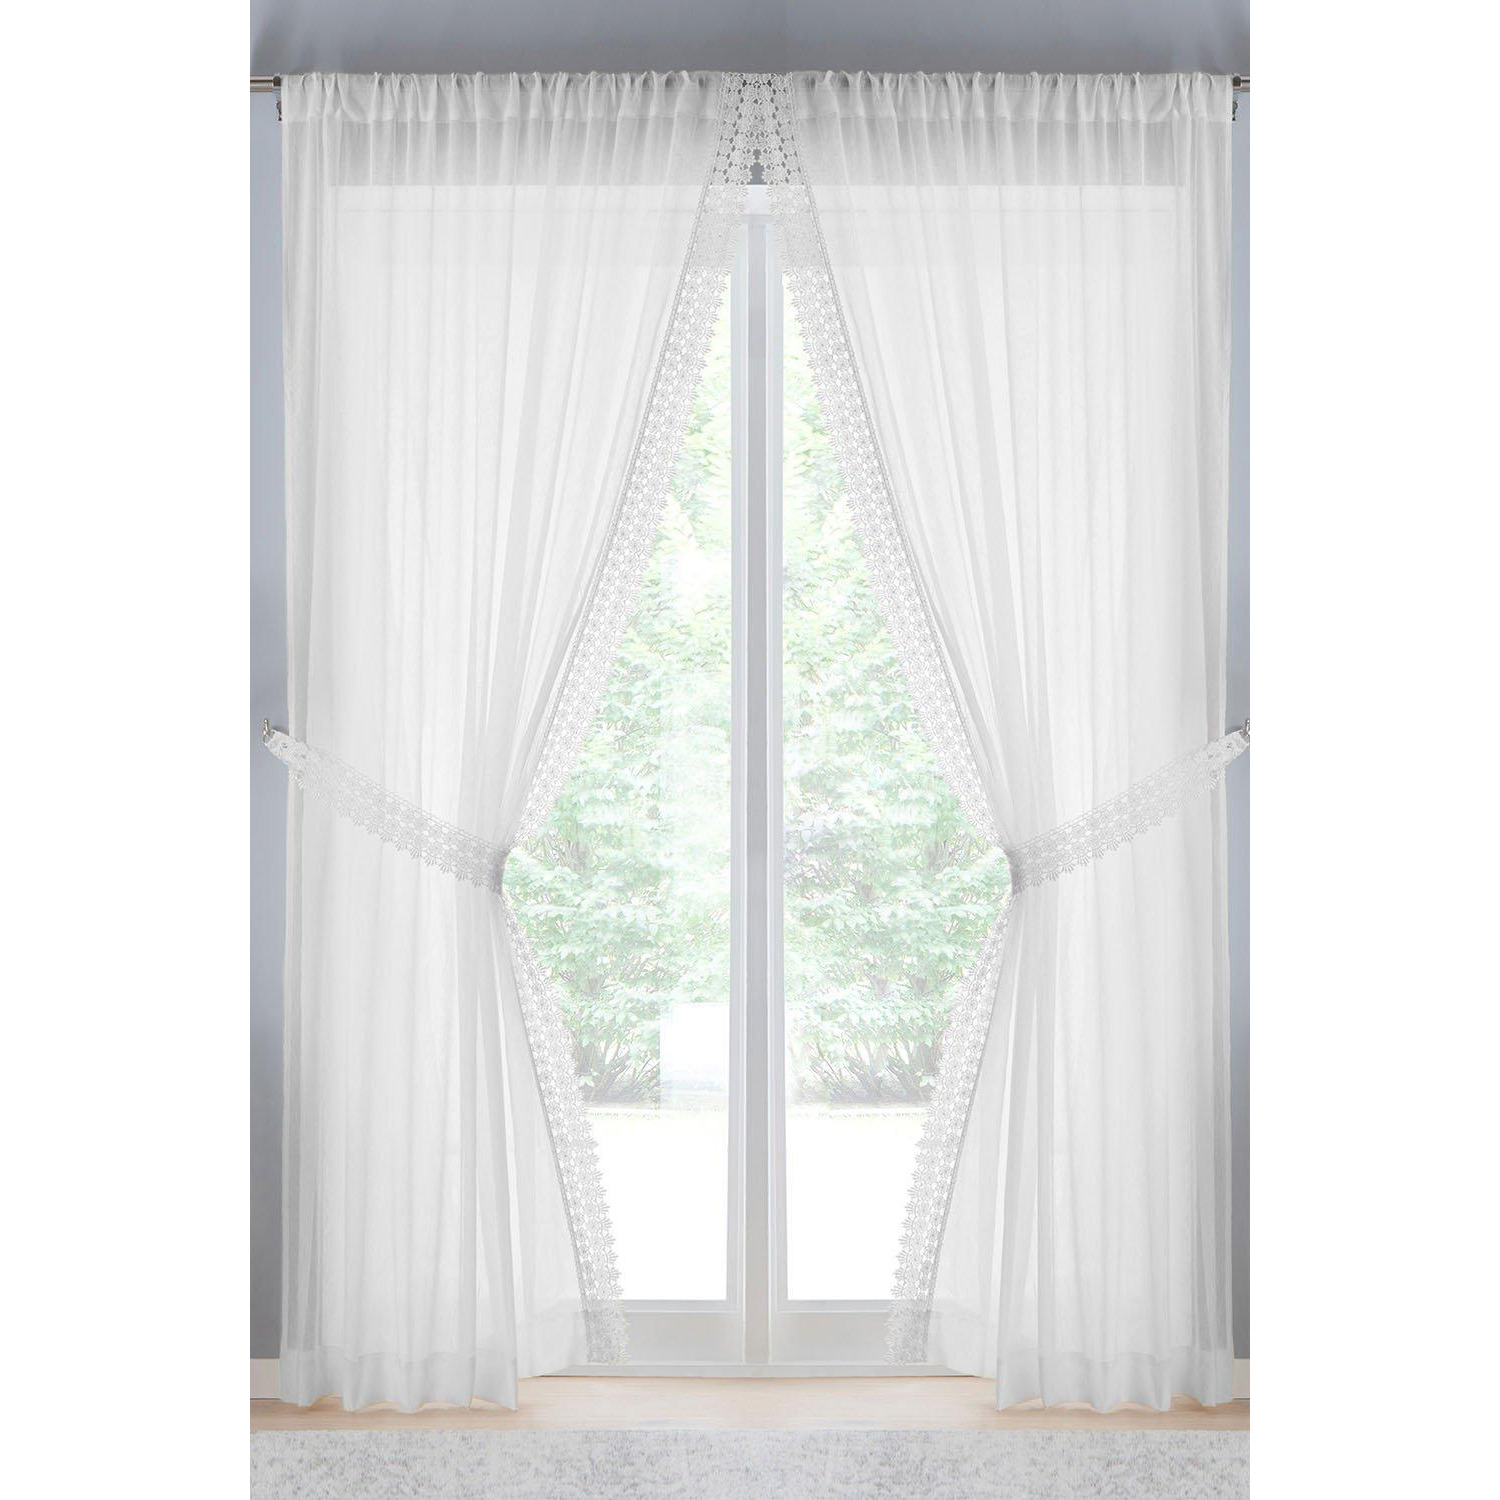 Windsor Crushed Voile Panel with Marame Trim and Tie Back - Pair - image 1